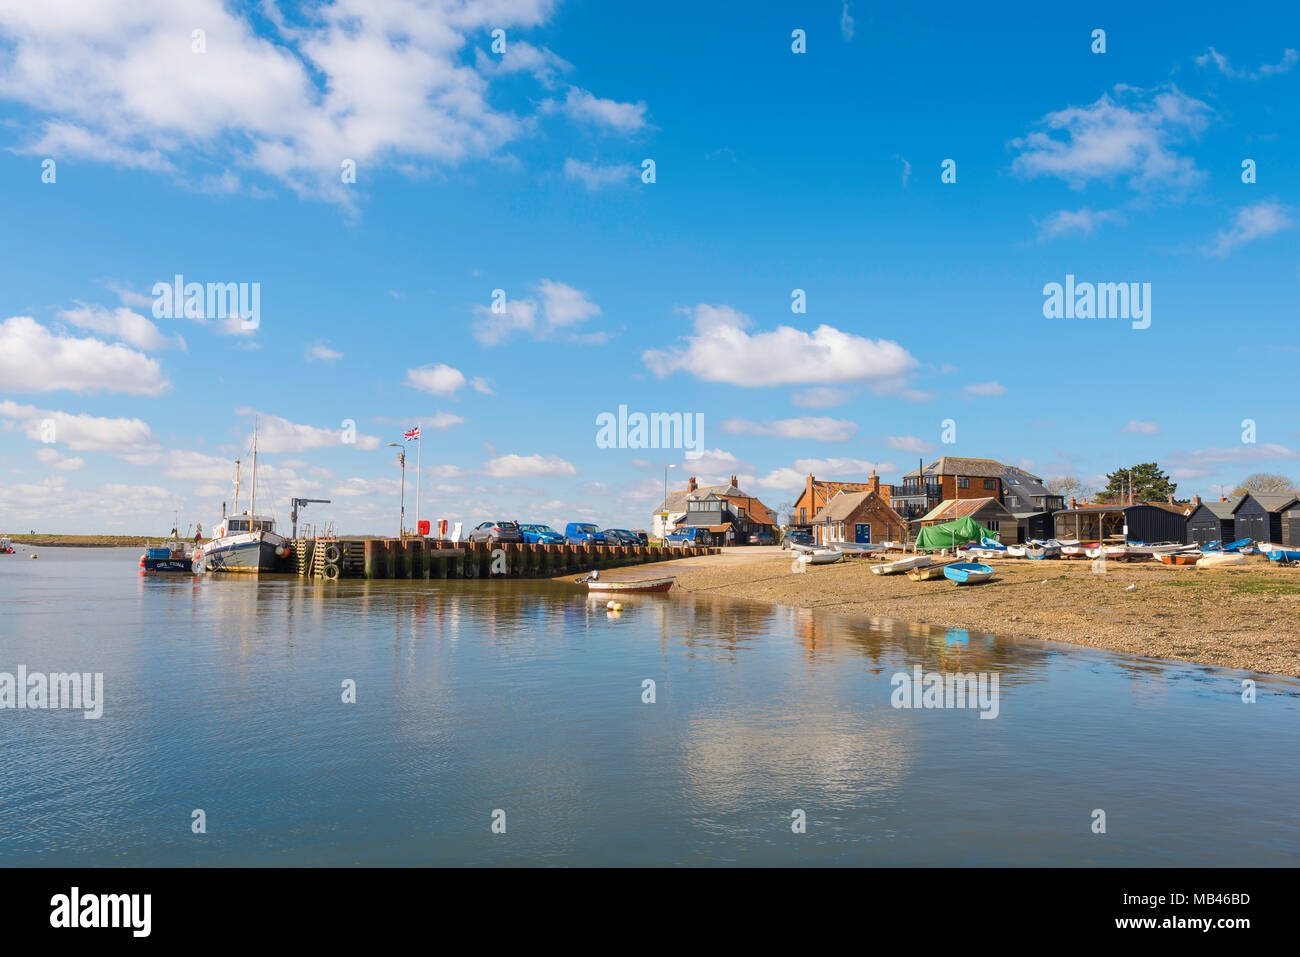 Orford Suffolk UK, view of the old quay on the banks of the River Alde in the Suffolk town of Orford, East Anglia, UK Stock Photo